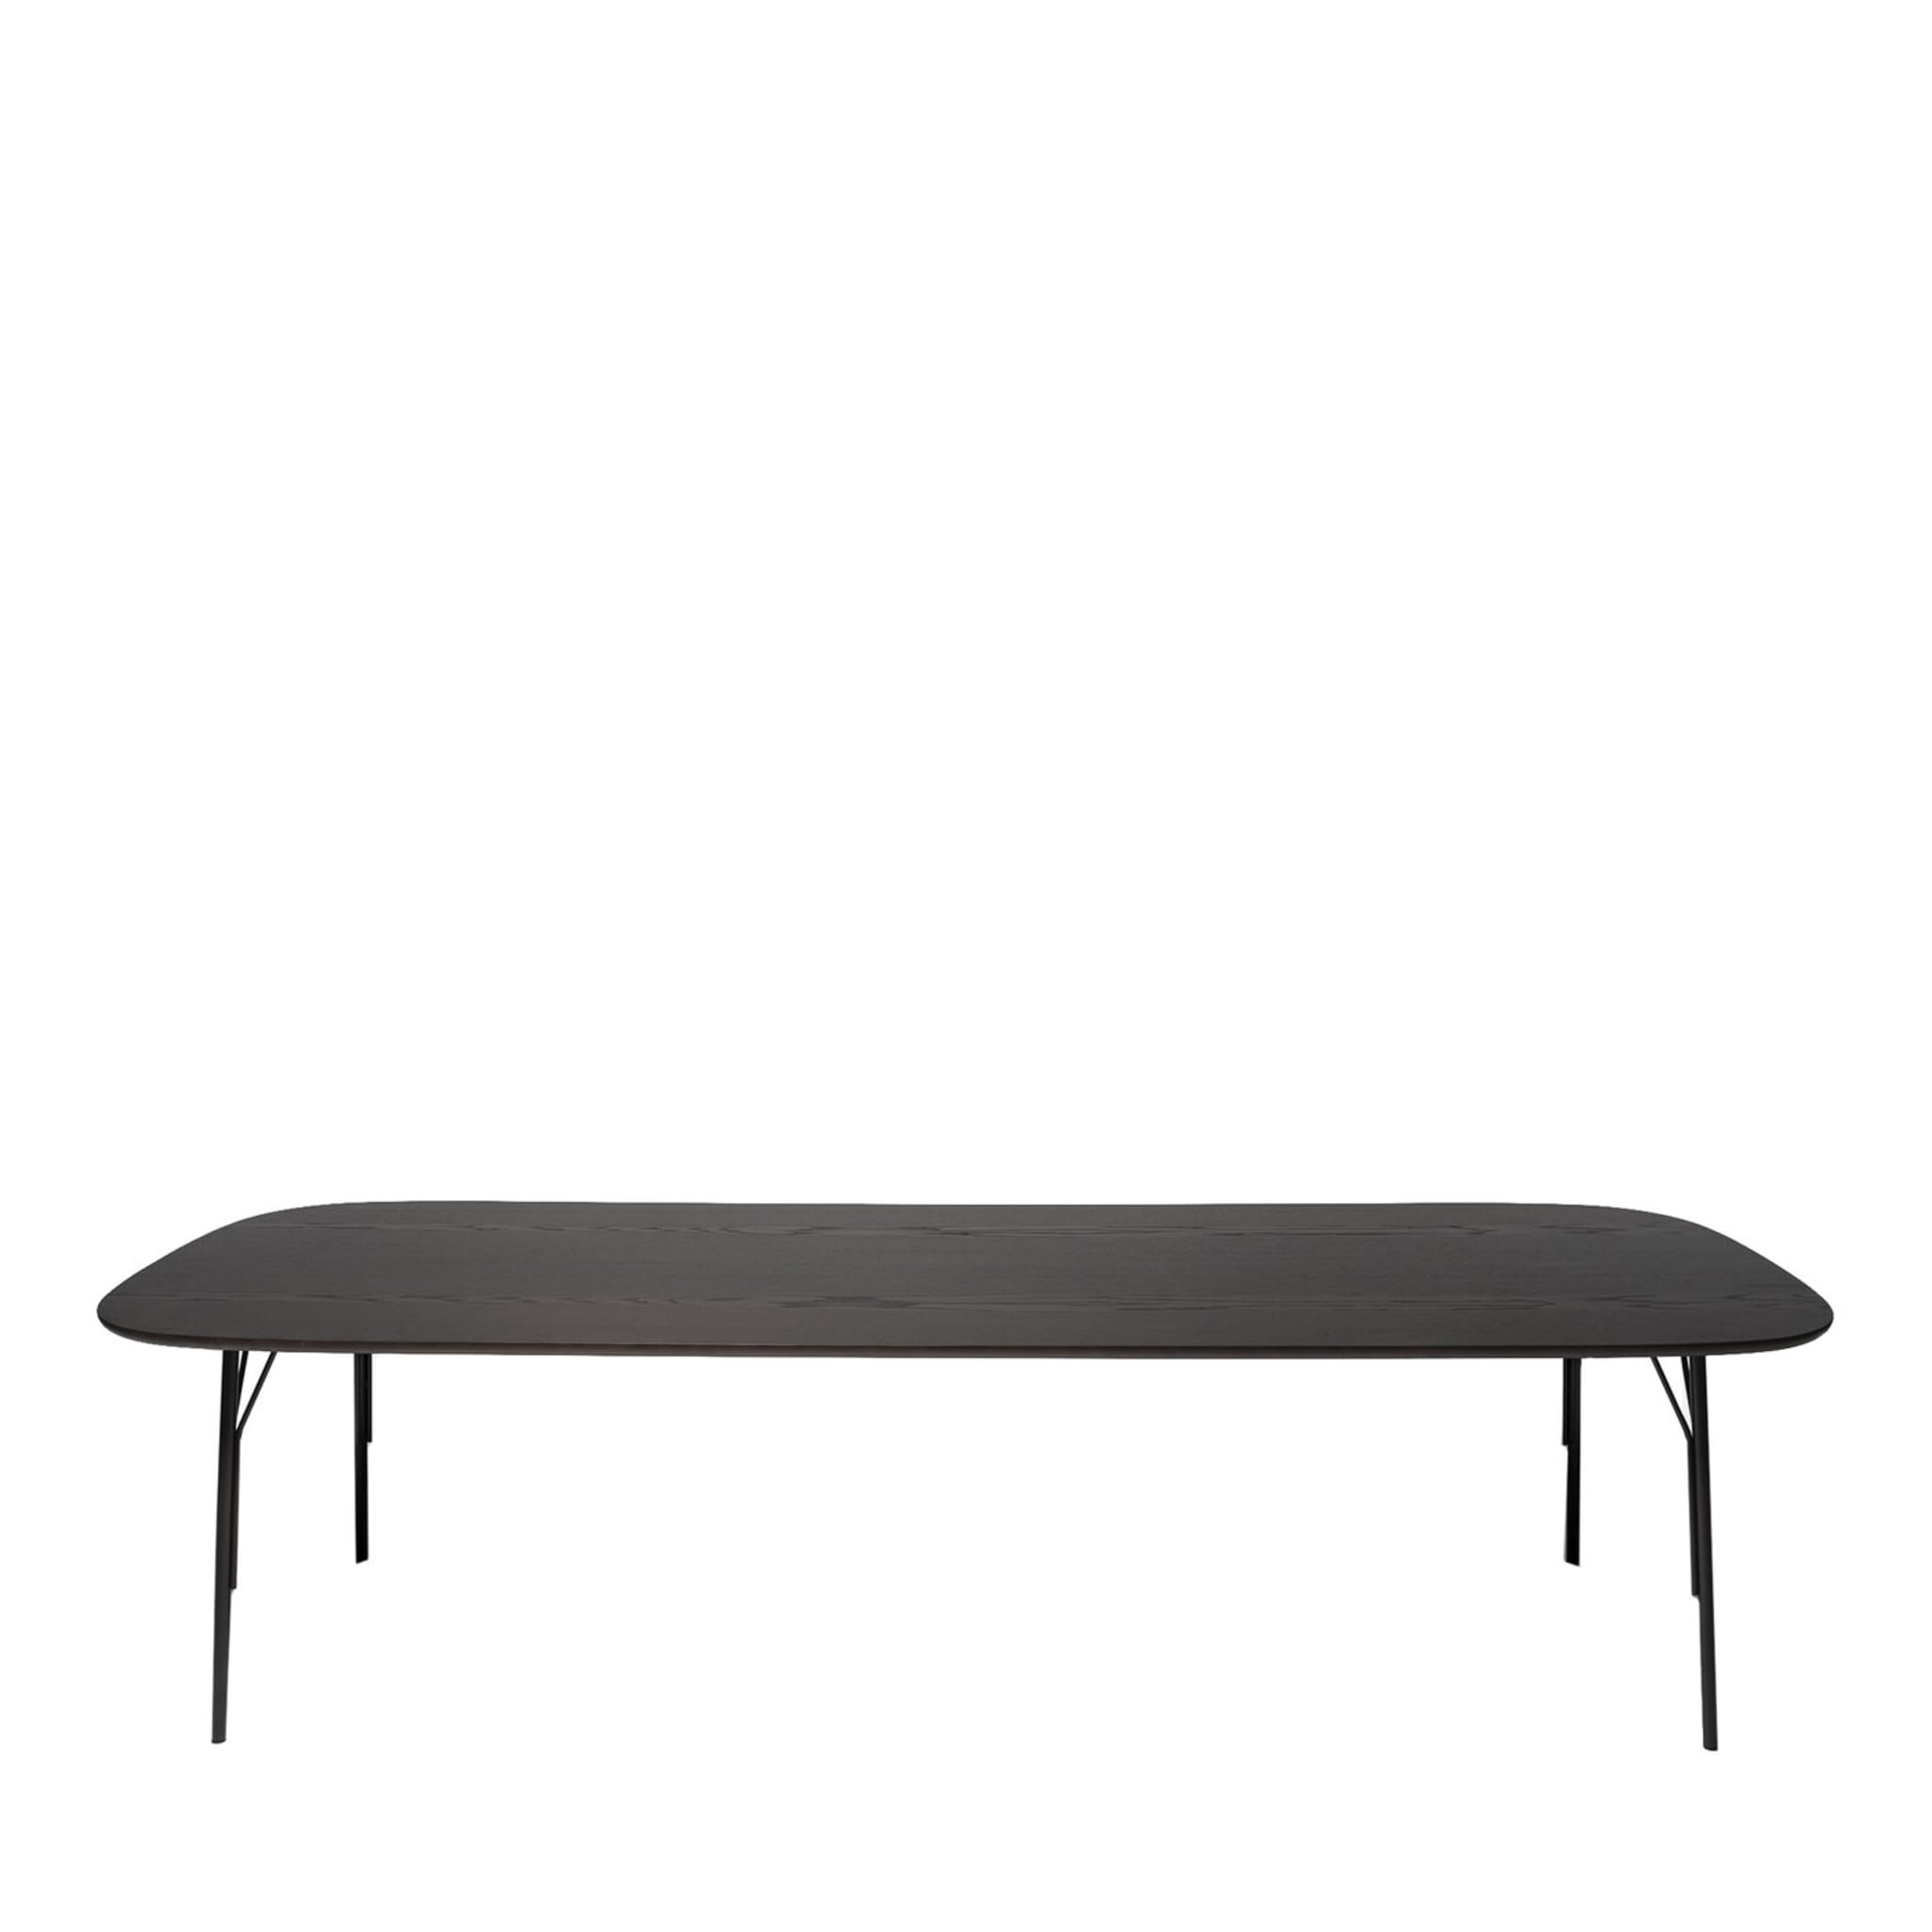 Kelly T Wenge Table by Claesson Koivisto Rune - Main view